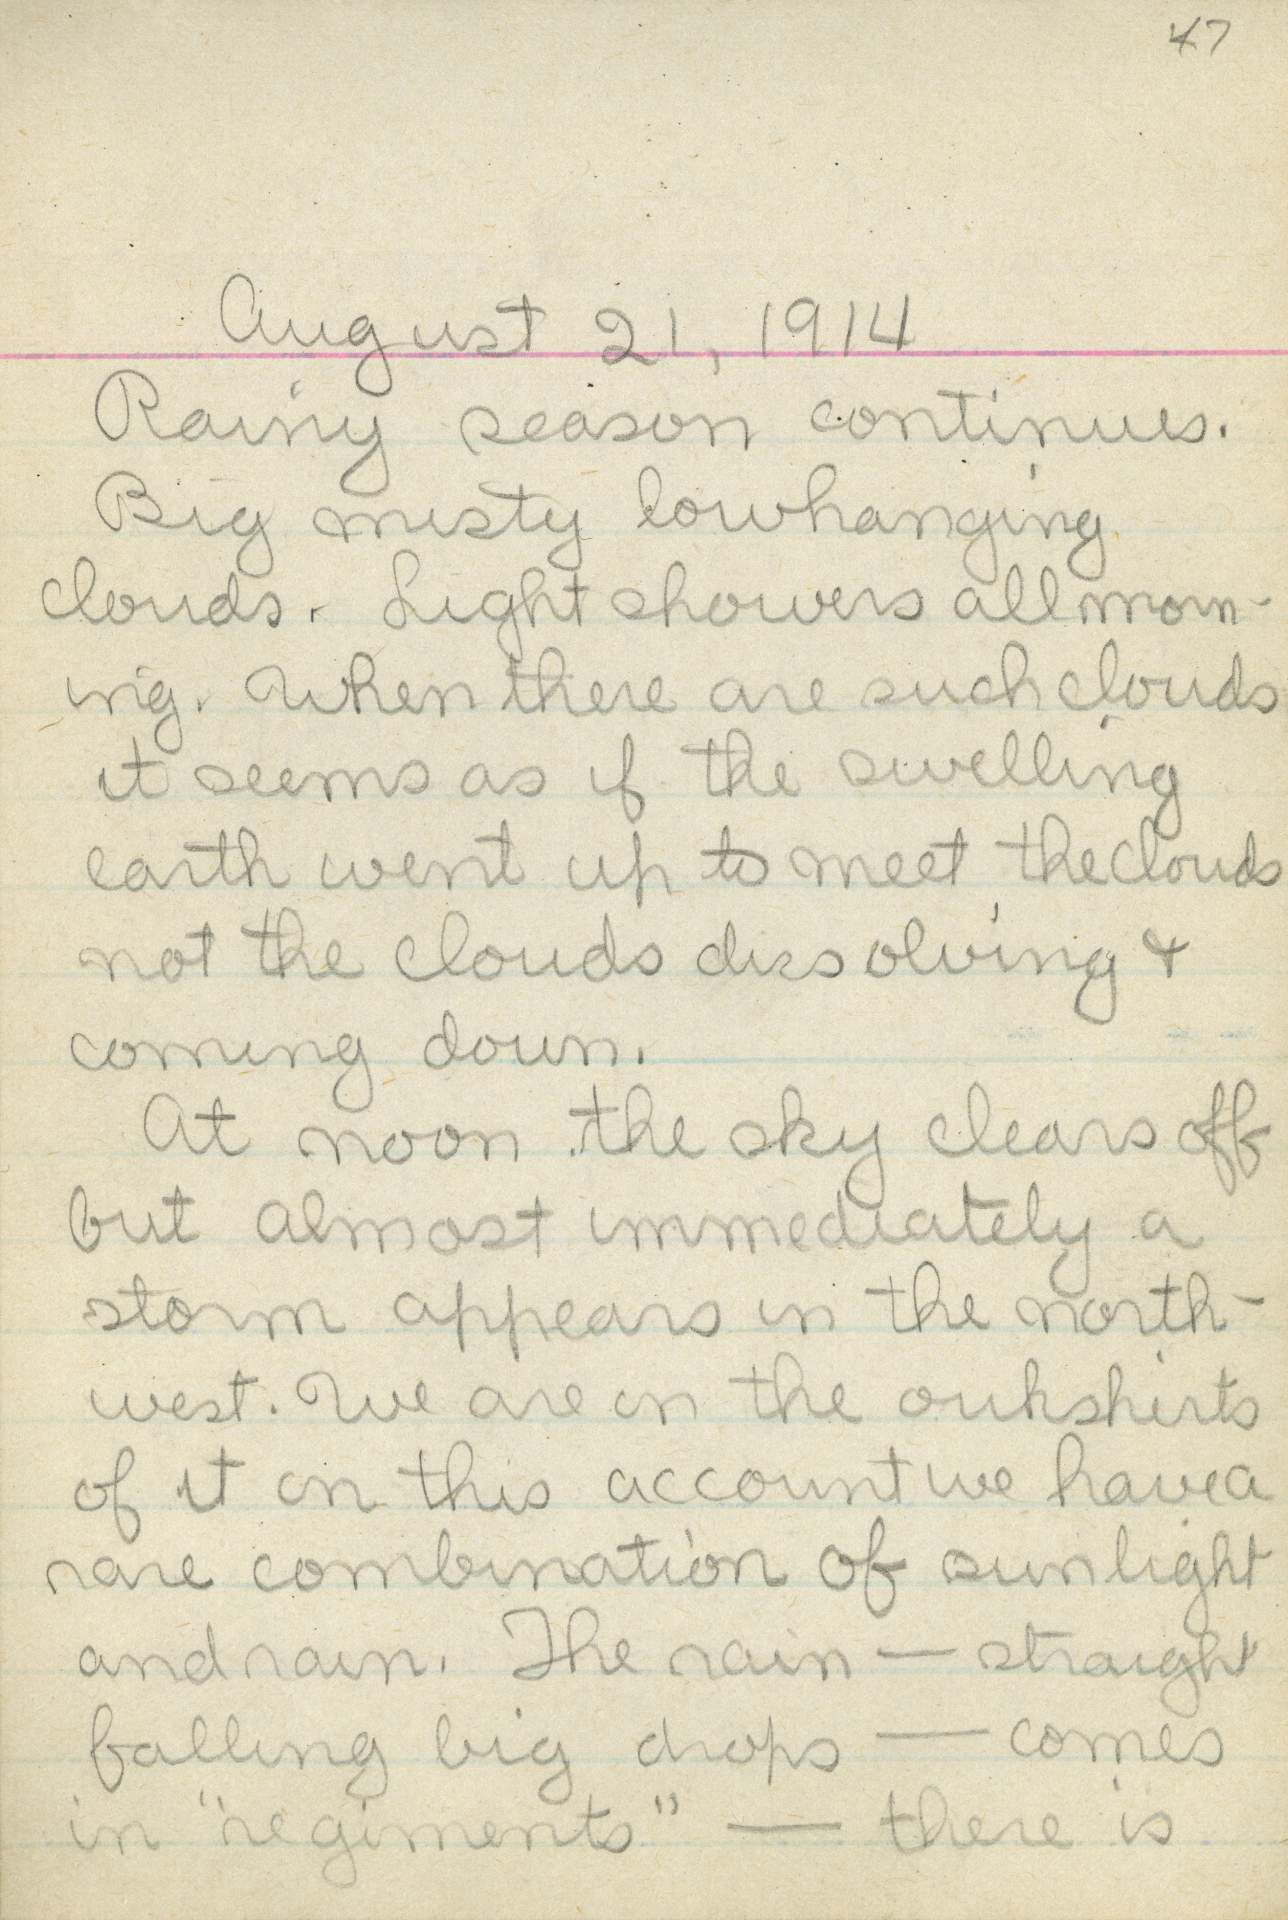 Untitled (Journal Page), Pg 47